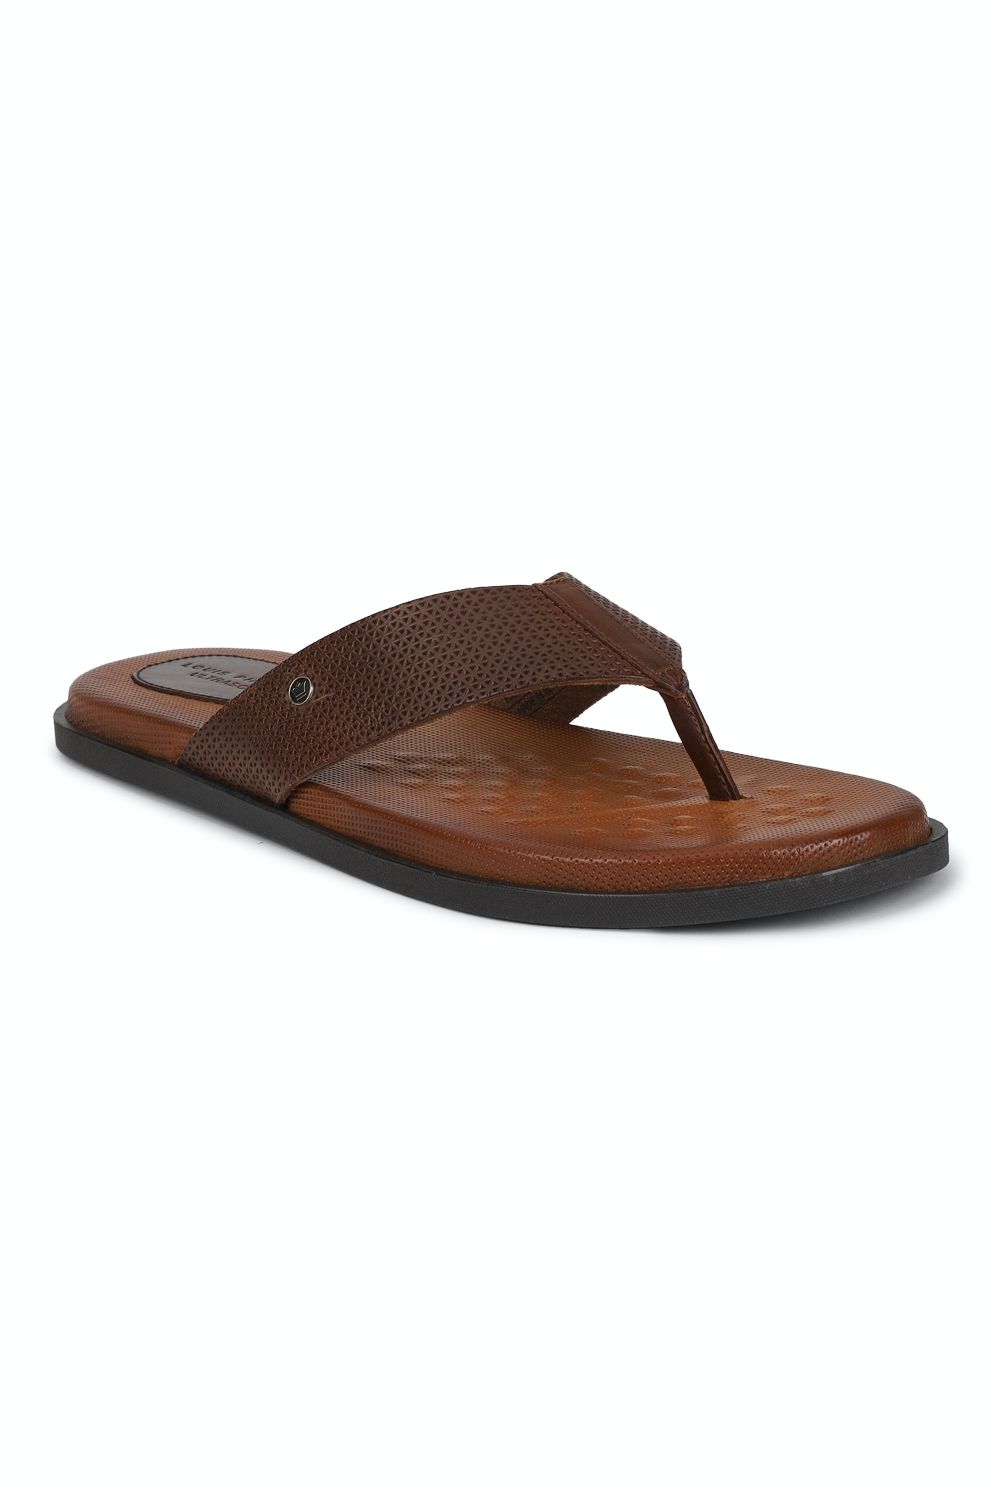 Louis Philippe Brown Sandals - 9